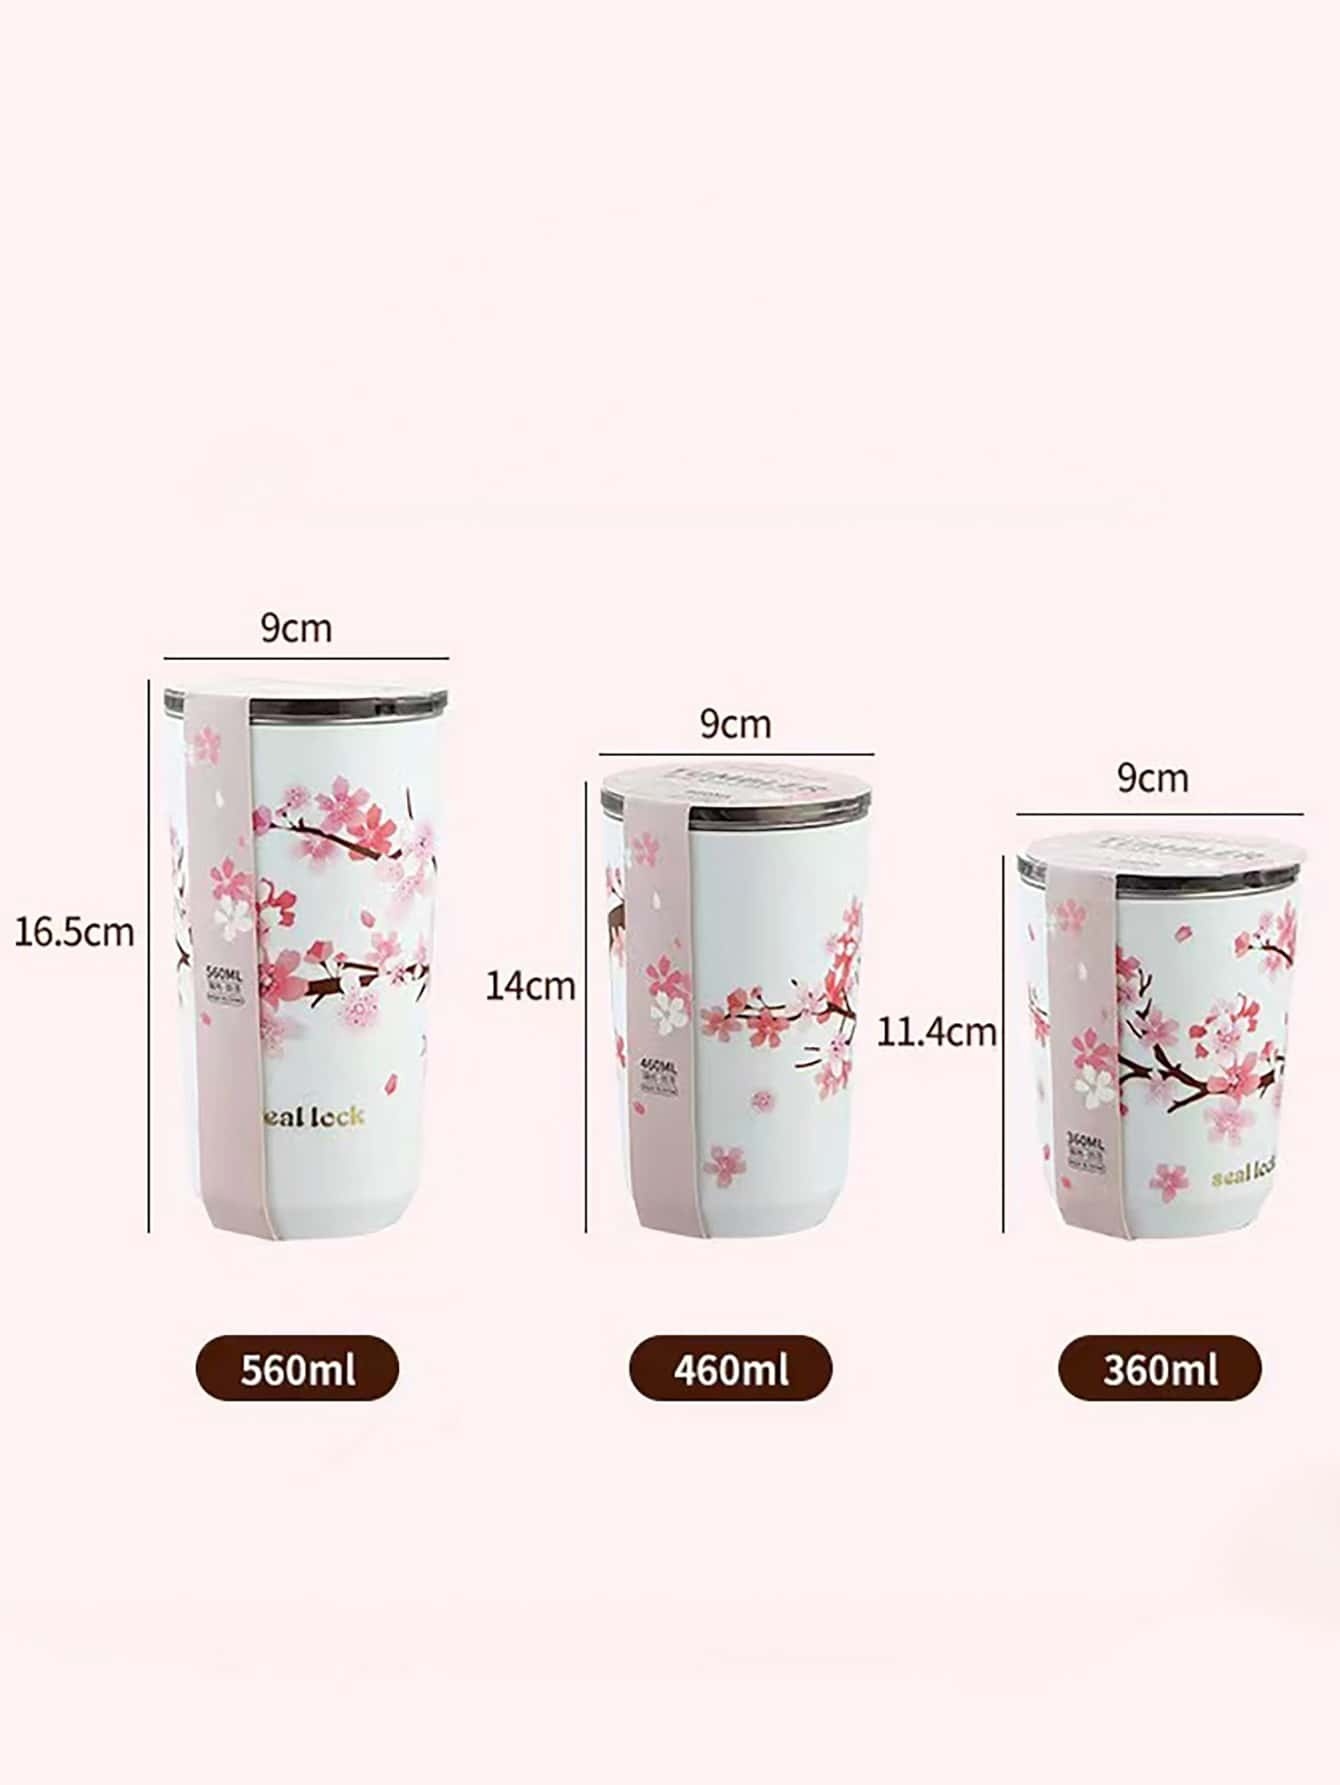 1pc Stainless Steel Cherry Blossom Thermal Mug With Lid,Double Wall Coffee Leak-Proof Water Cup,Travel Camping Tea Tumbler Drinkware